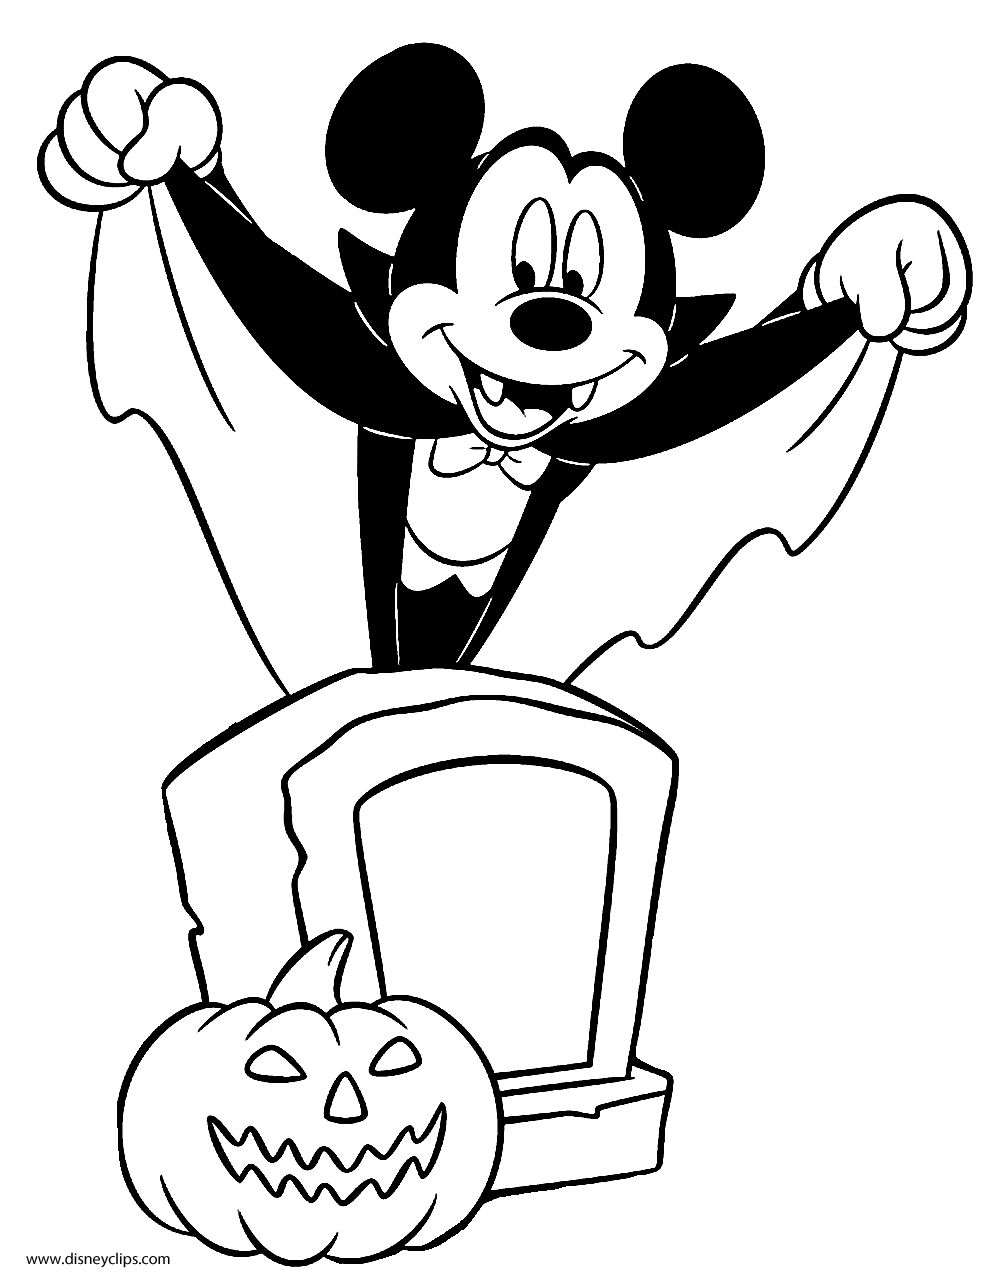 Disney Halloween Coloring Pages 2 | Disney Fun and Games